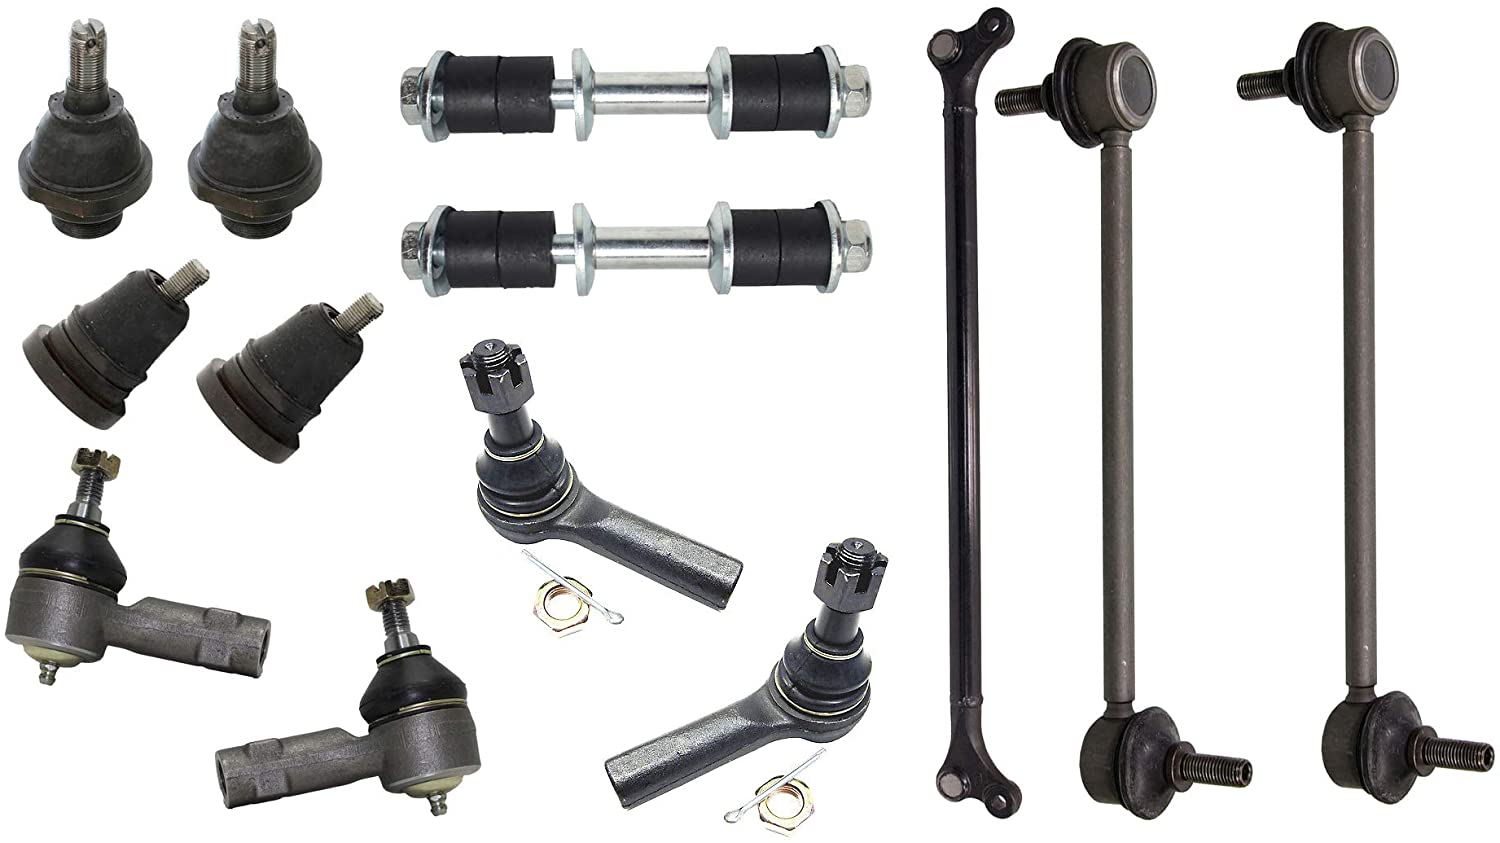 Detroit Axle - 13PC Upper & Lower Ball Joint, Front & Rear Sway Bar, Inner & Outer Tie Rod, Center Link Kit for 2000 2001 2002 2003 2004 Nissan Xterra